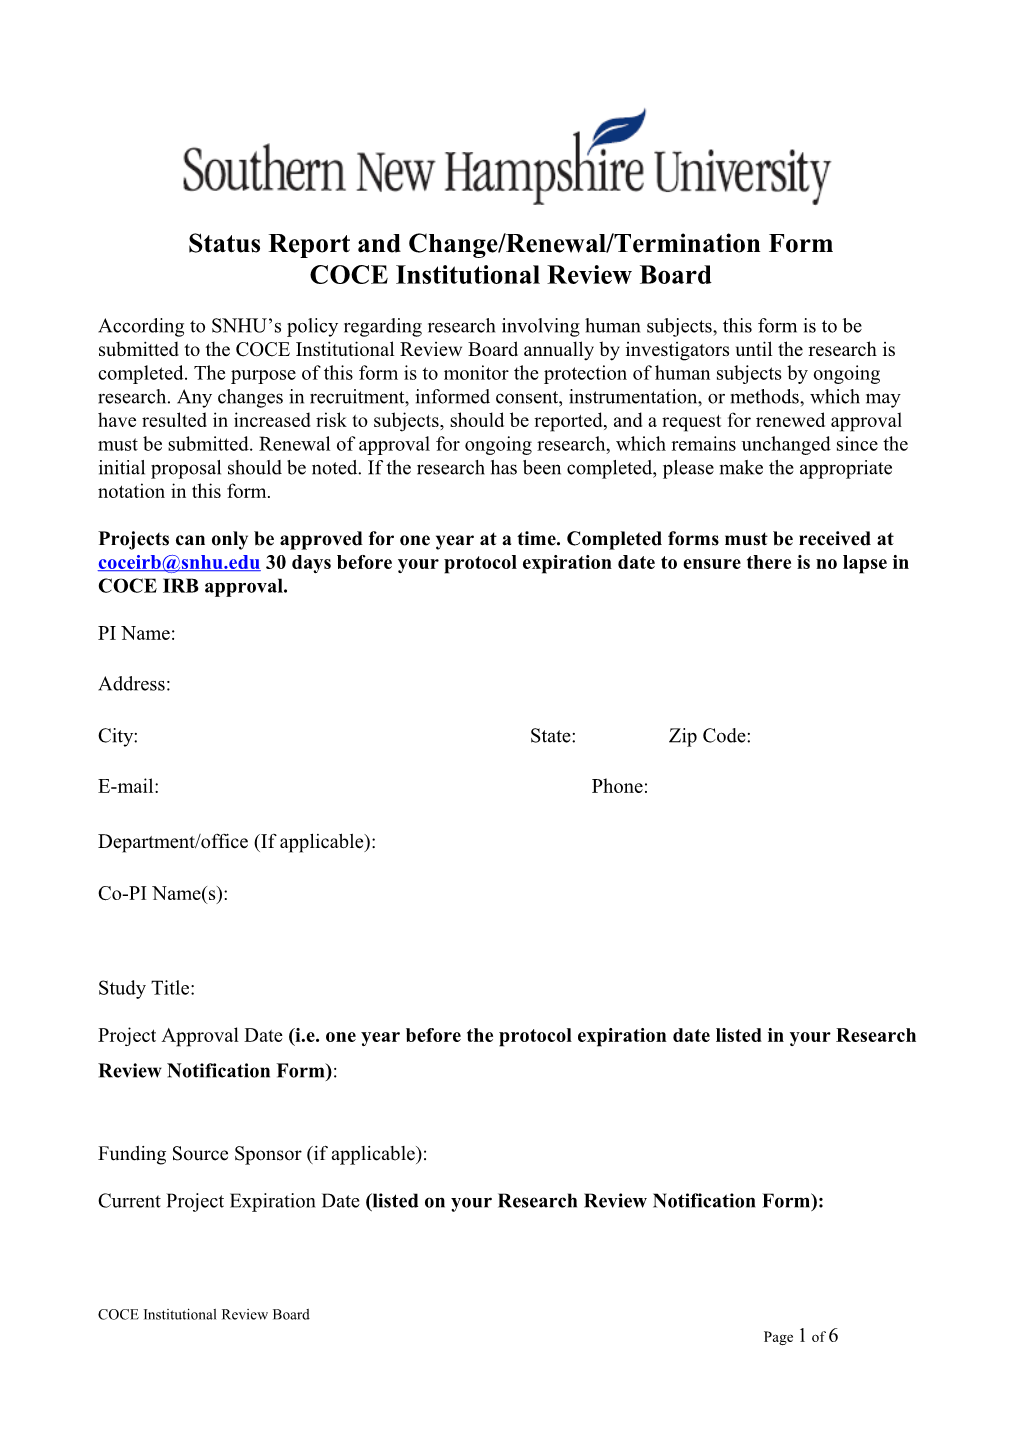 Status Report and Change/Renewal/Termination Form